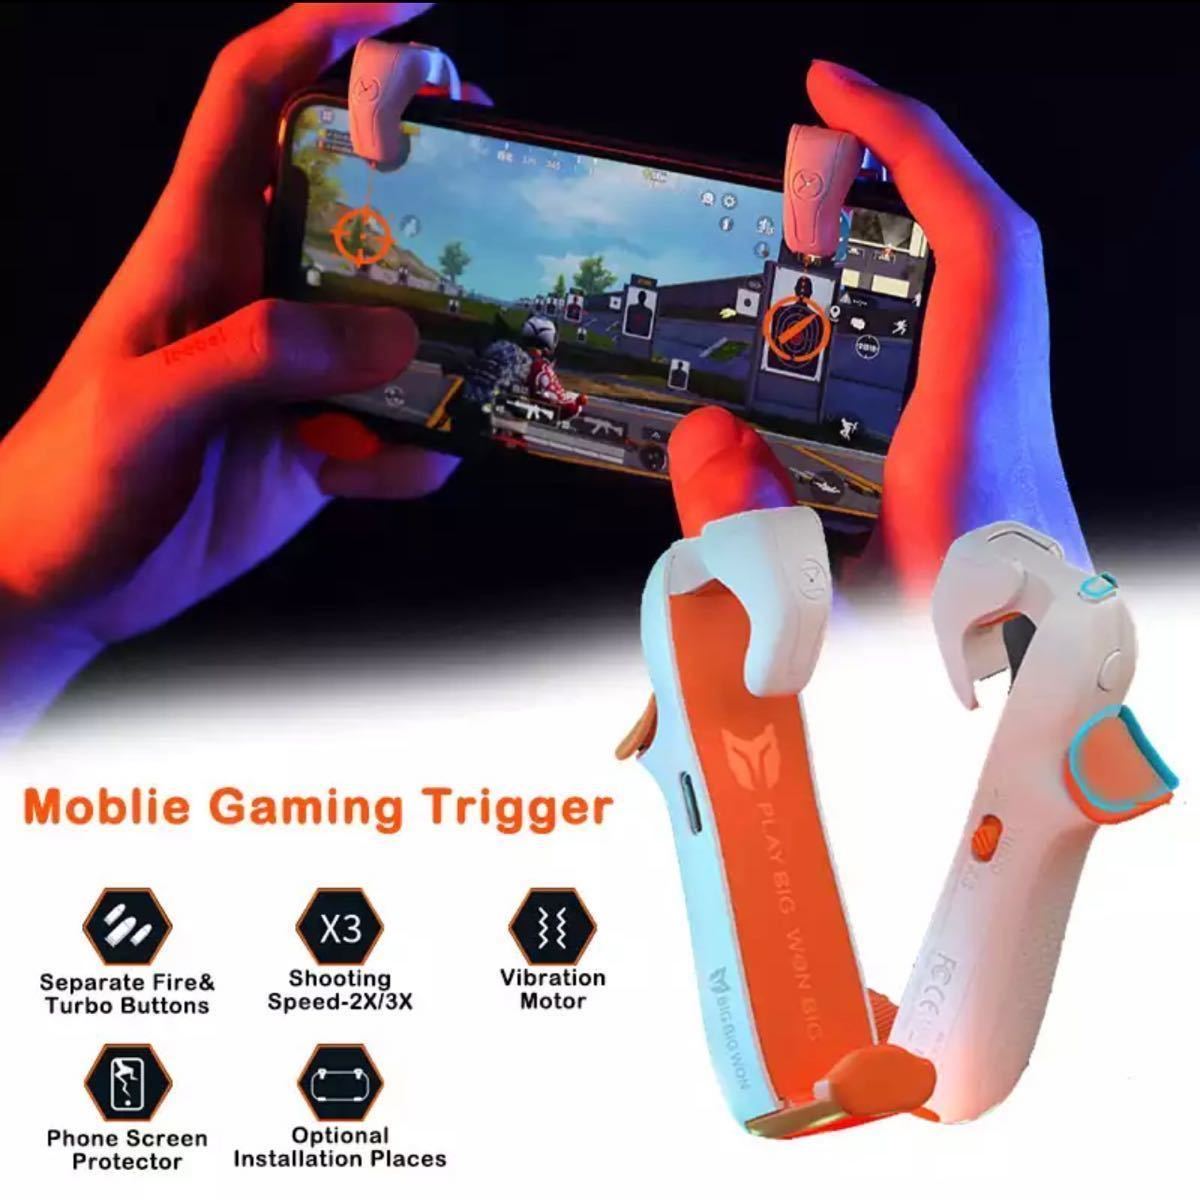 2 piece BIGBIG WON smartphone controller joystick smartphone for fps.. line moving PUBG mobile apex Mobile COD M postage anonymity delivery new goods 